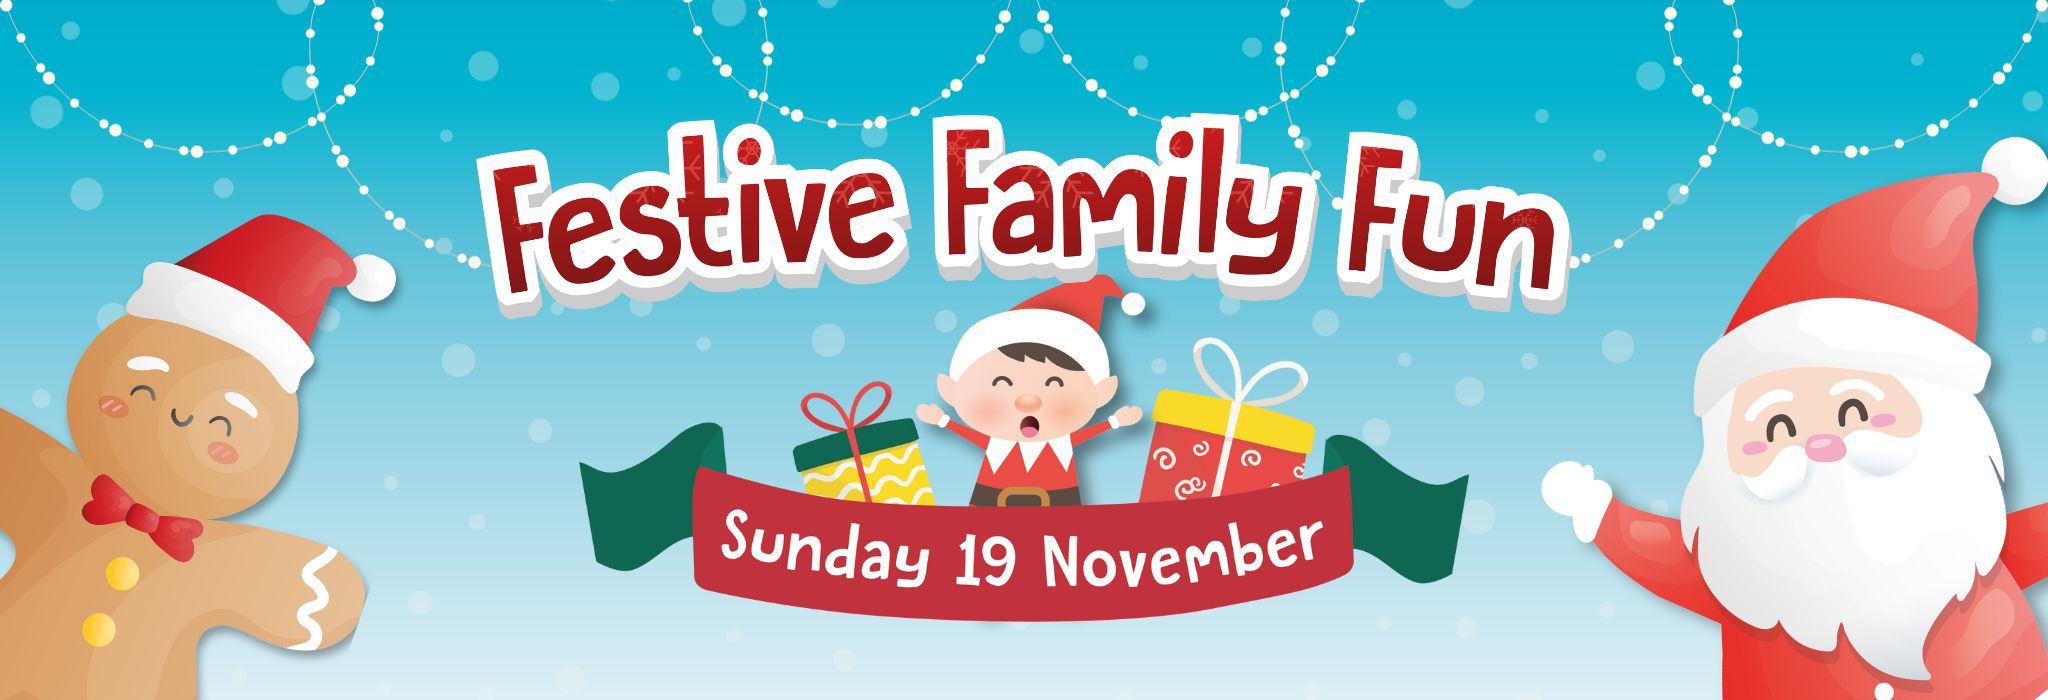 Festive Family Fun banner with Christmas characters.